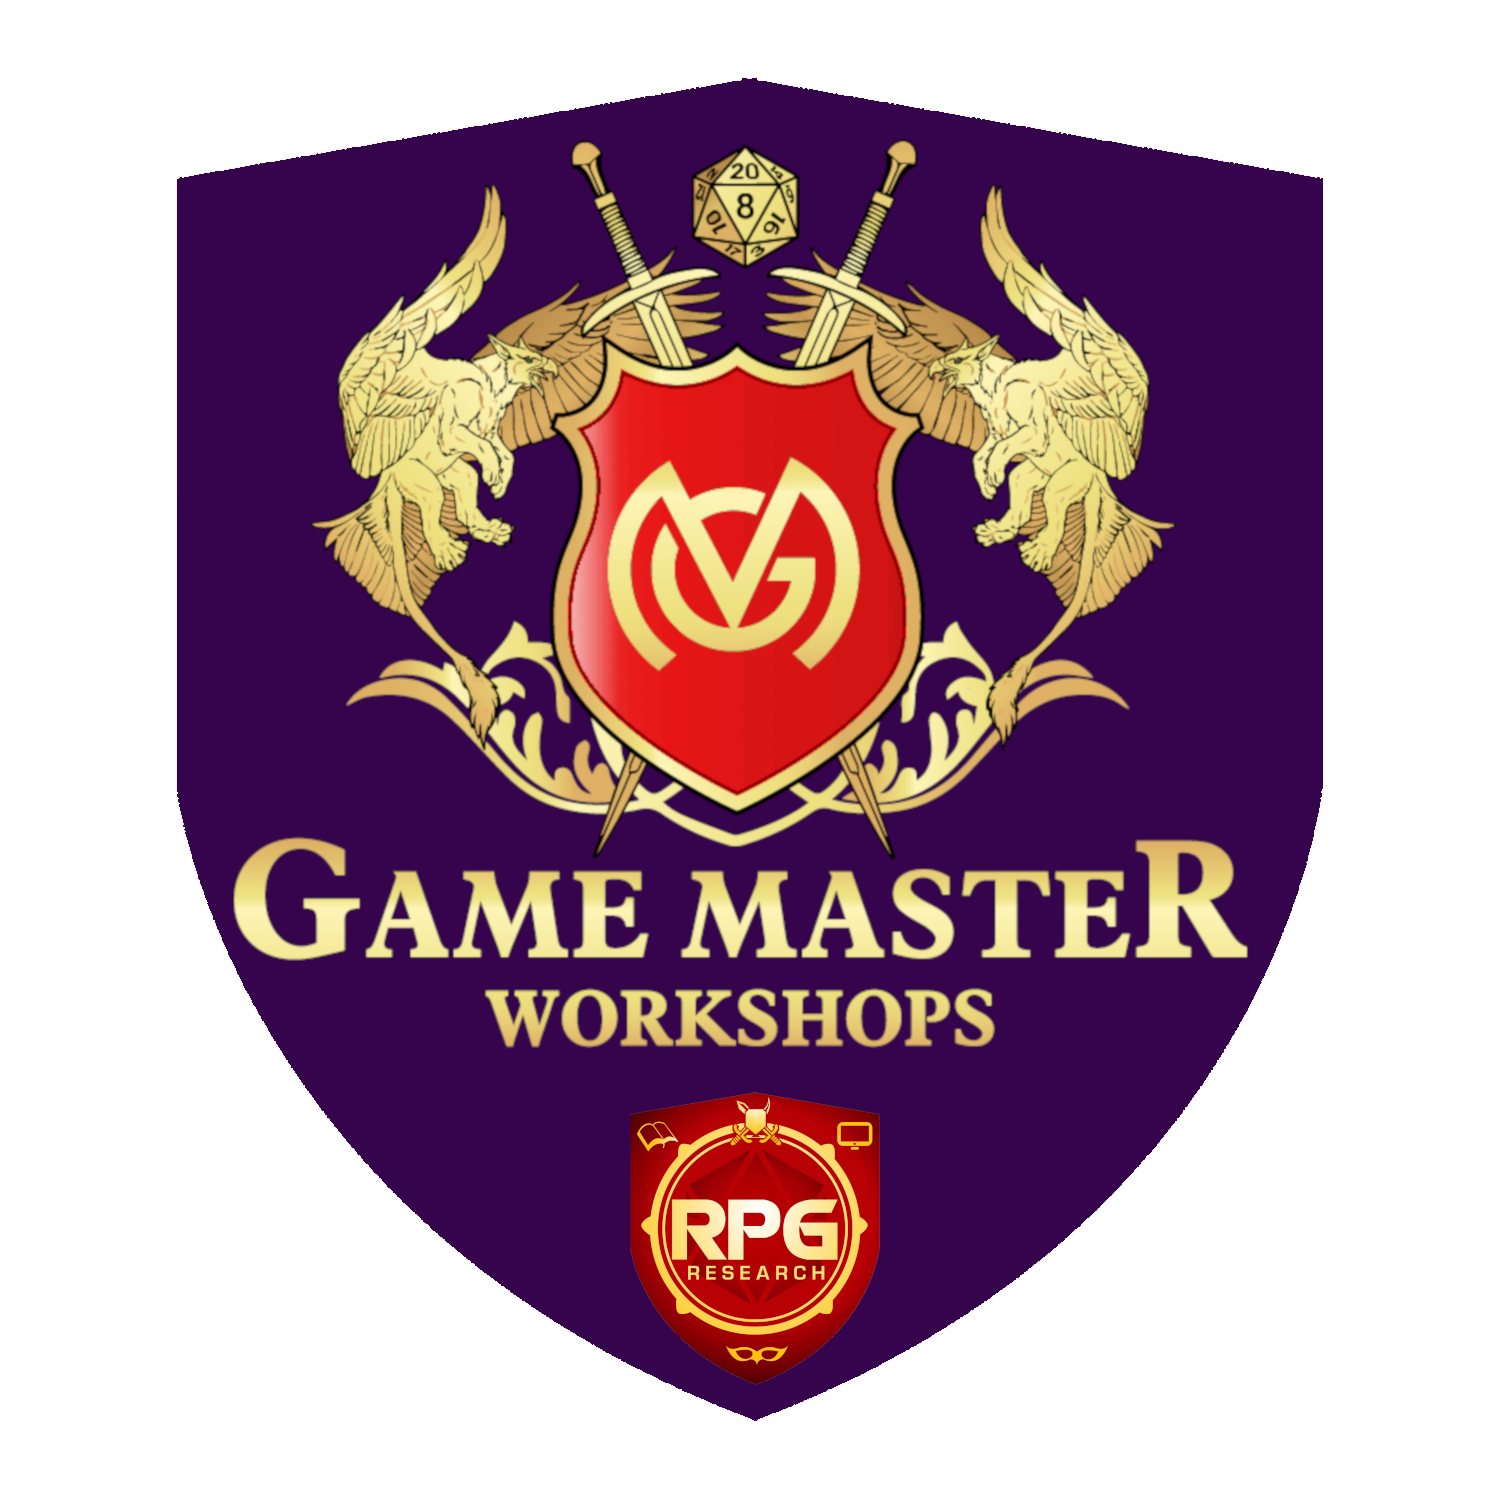 GM-workshops-with-rpg-research-logo-20190415a.png